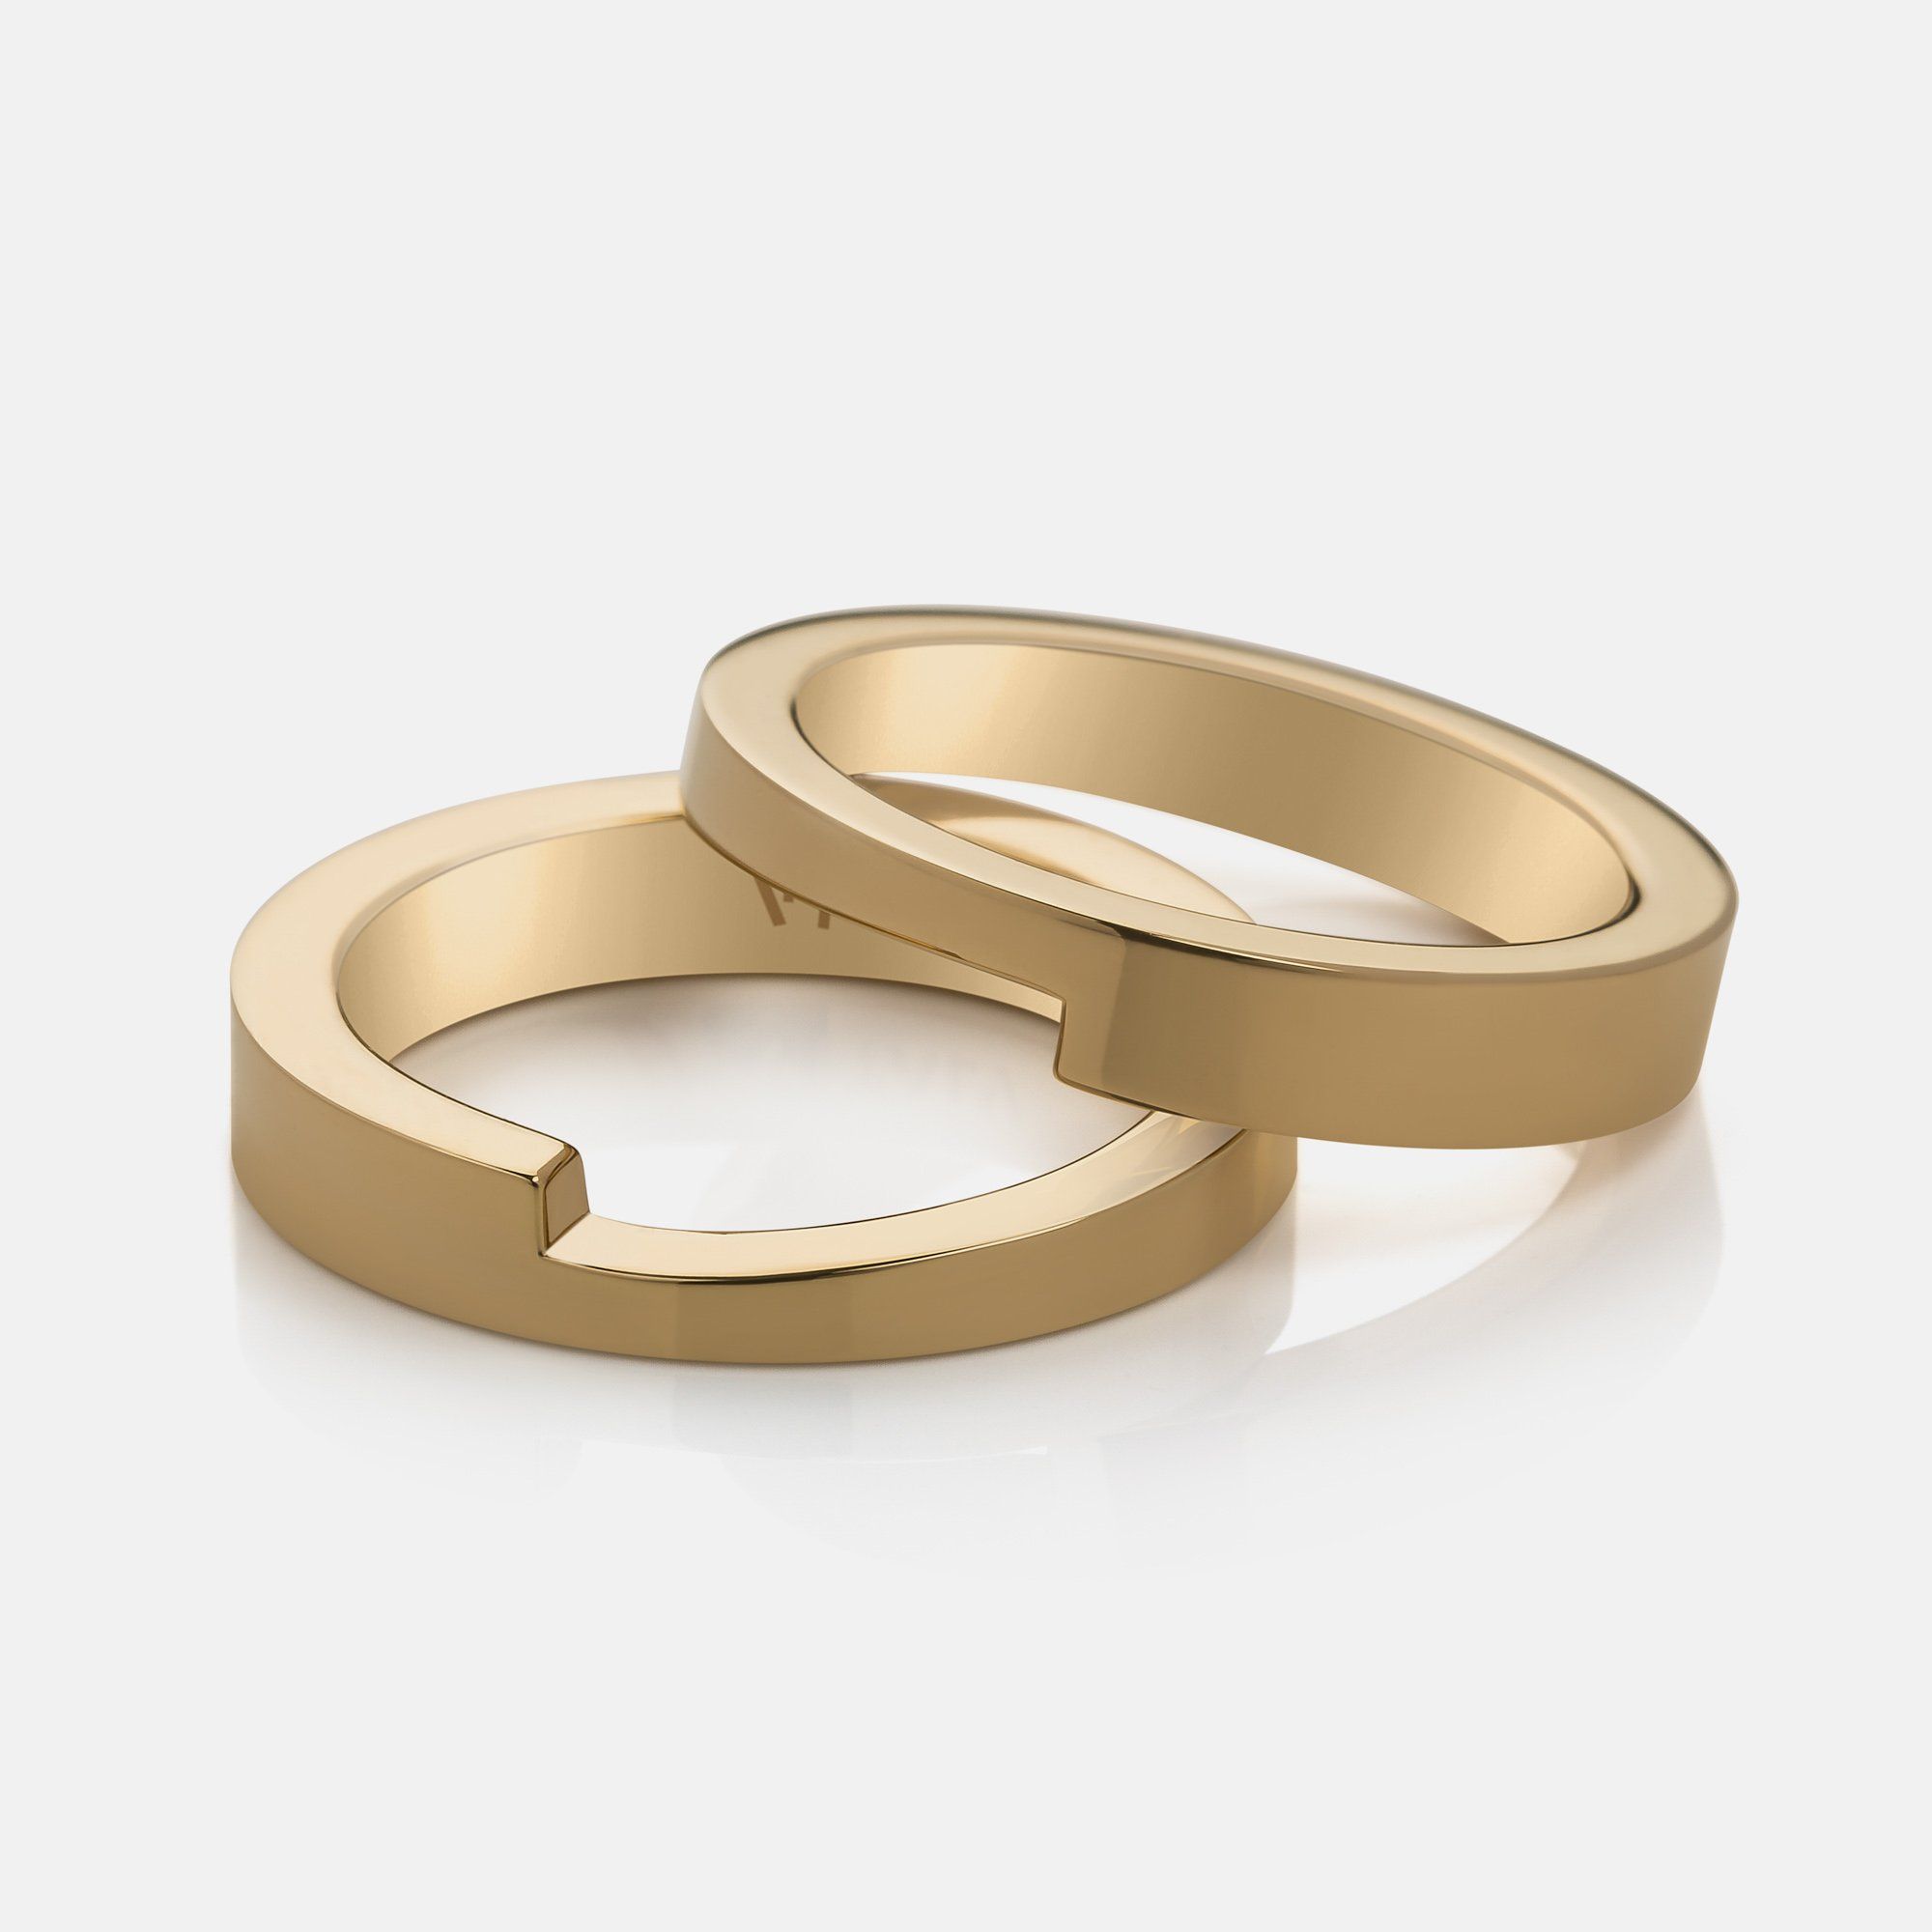 Everything You Need to Know About Couple
Rings